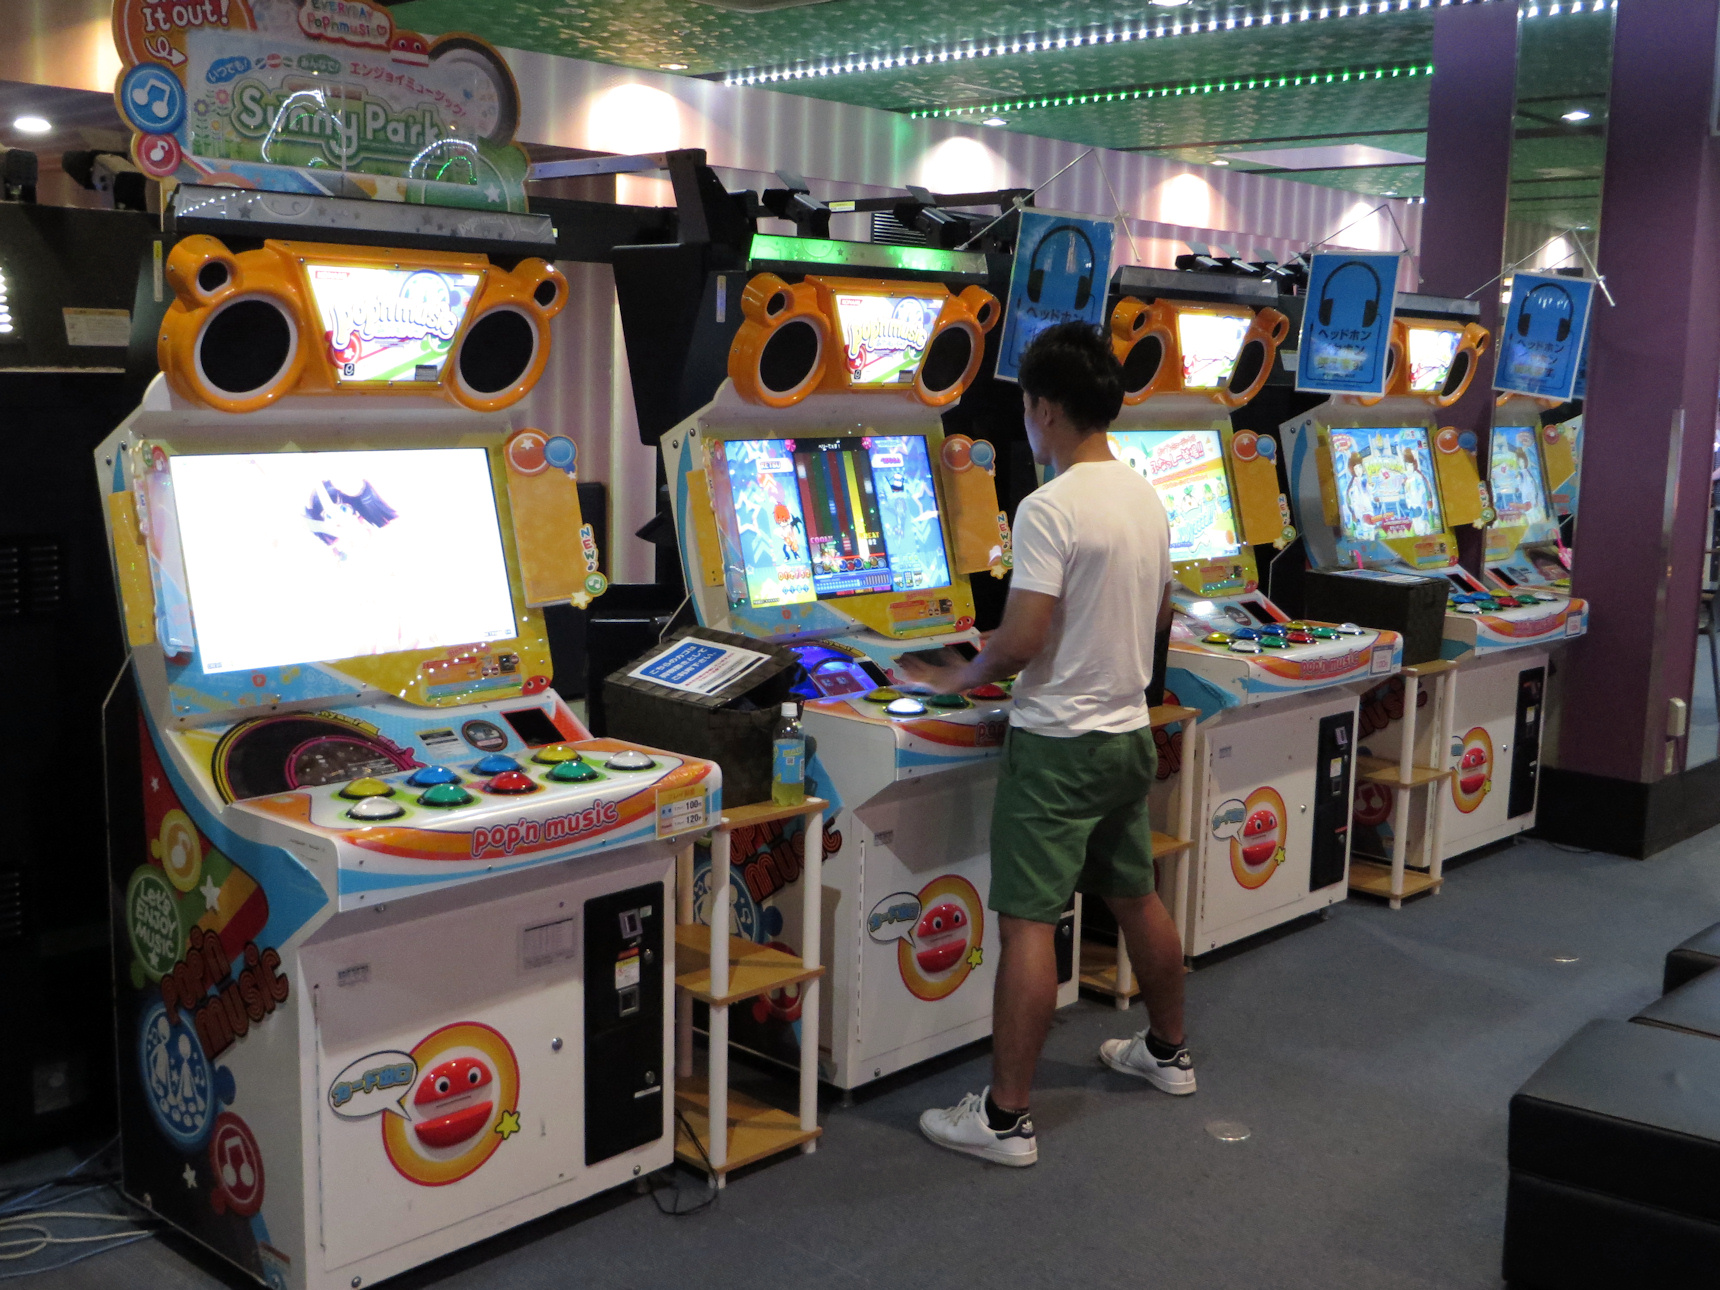 File:Popn stage arcade.jpg - Wikimedia Commons